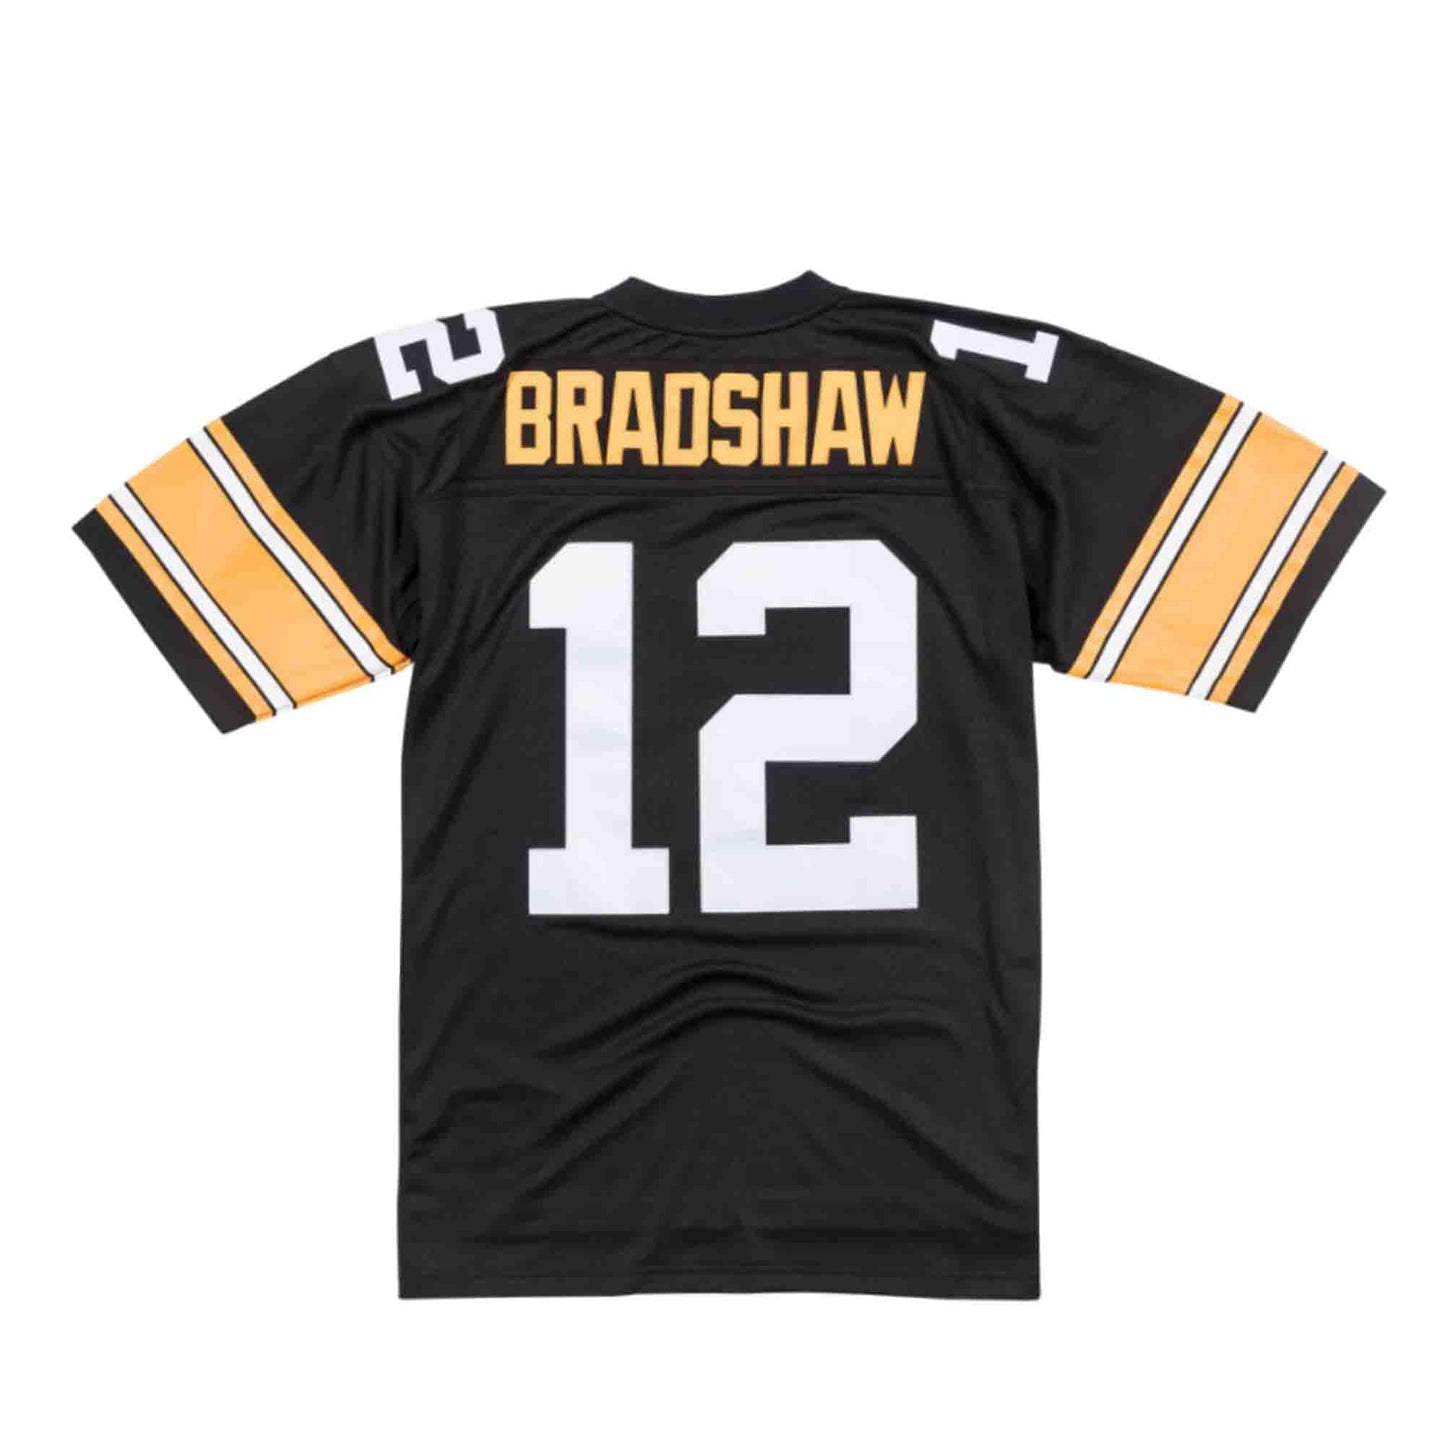 NFL Legacy Jersey Pittsburgh Steelers 1976 Terry Bradshaw #12